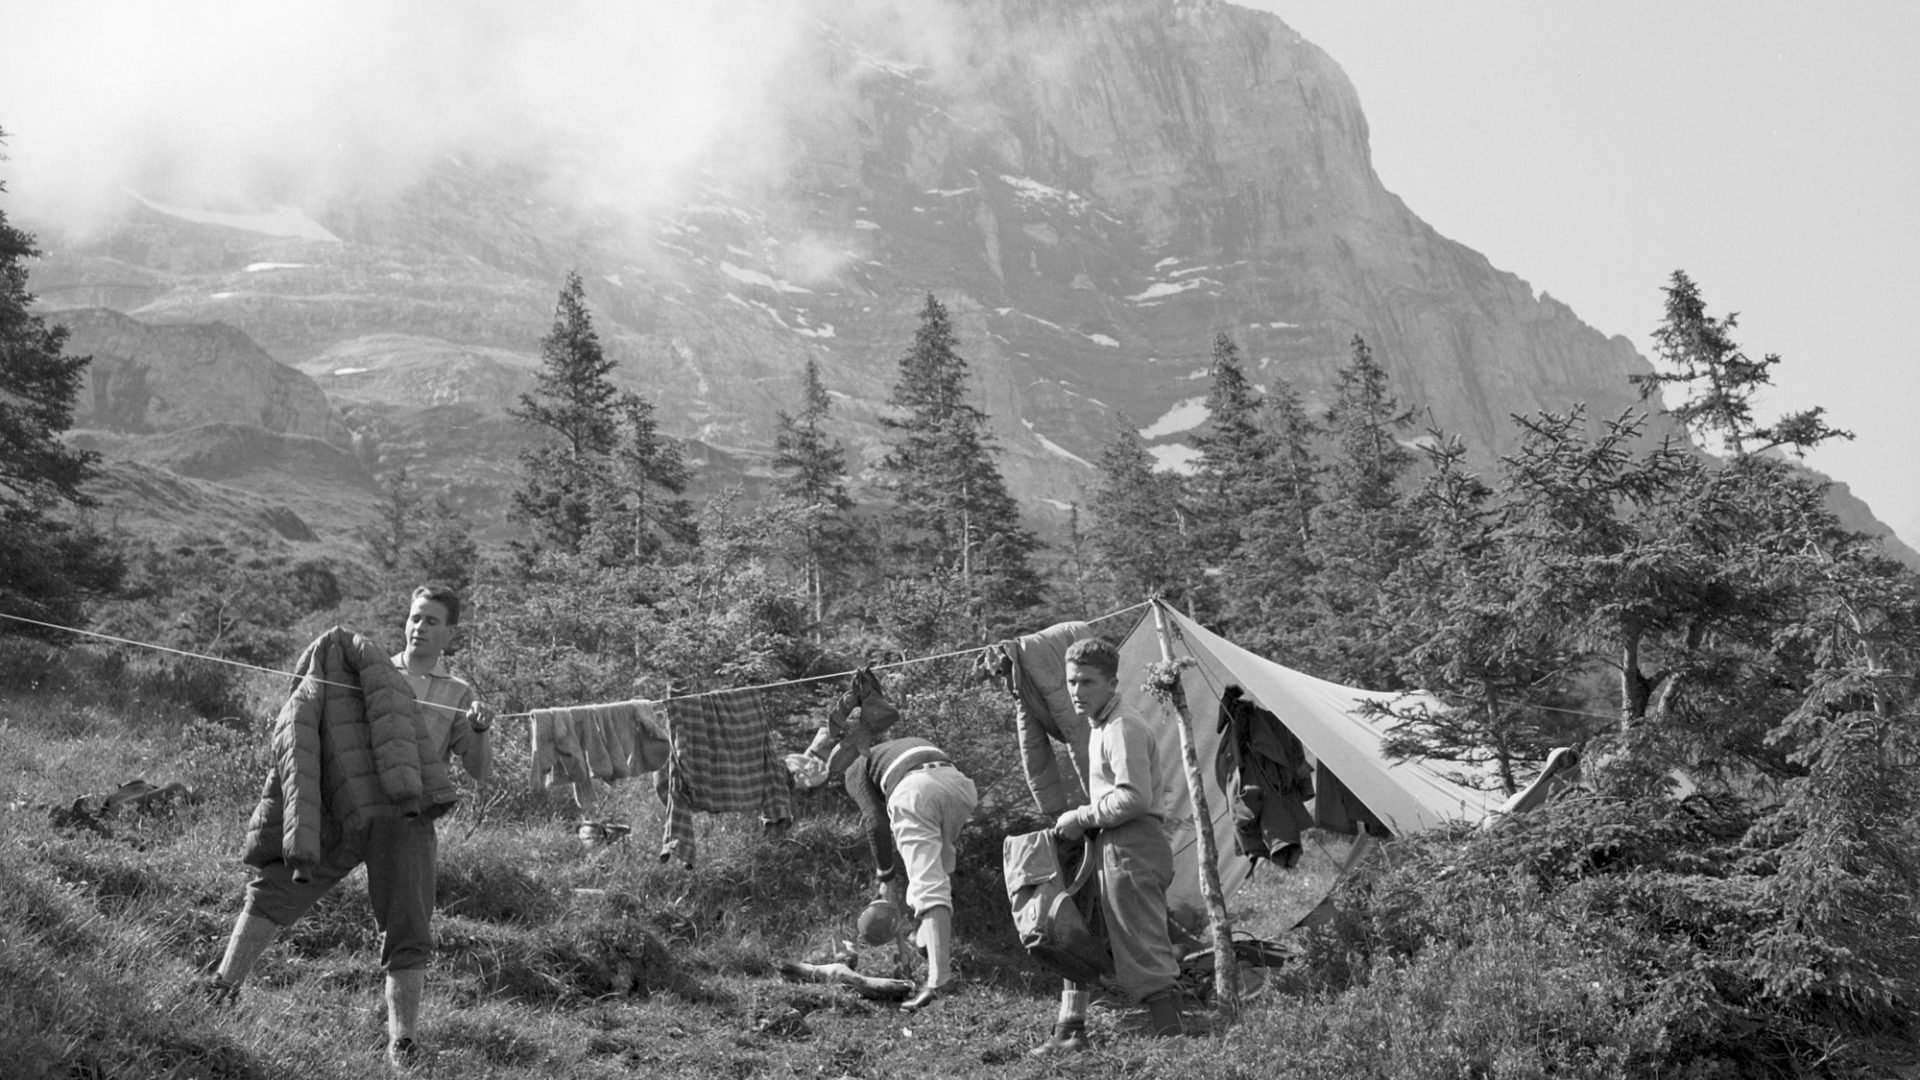 Climbers set up a bivouac camp during their ascent of the north face of the Eiger, 1958. Photo: Milou Steiner/RDB/ullstein bild/Getty